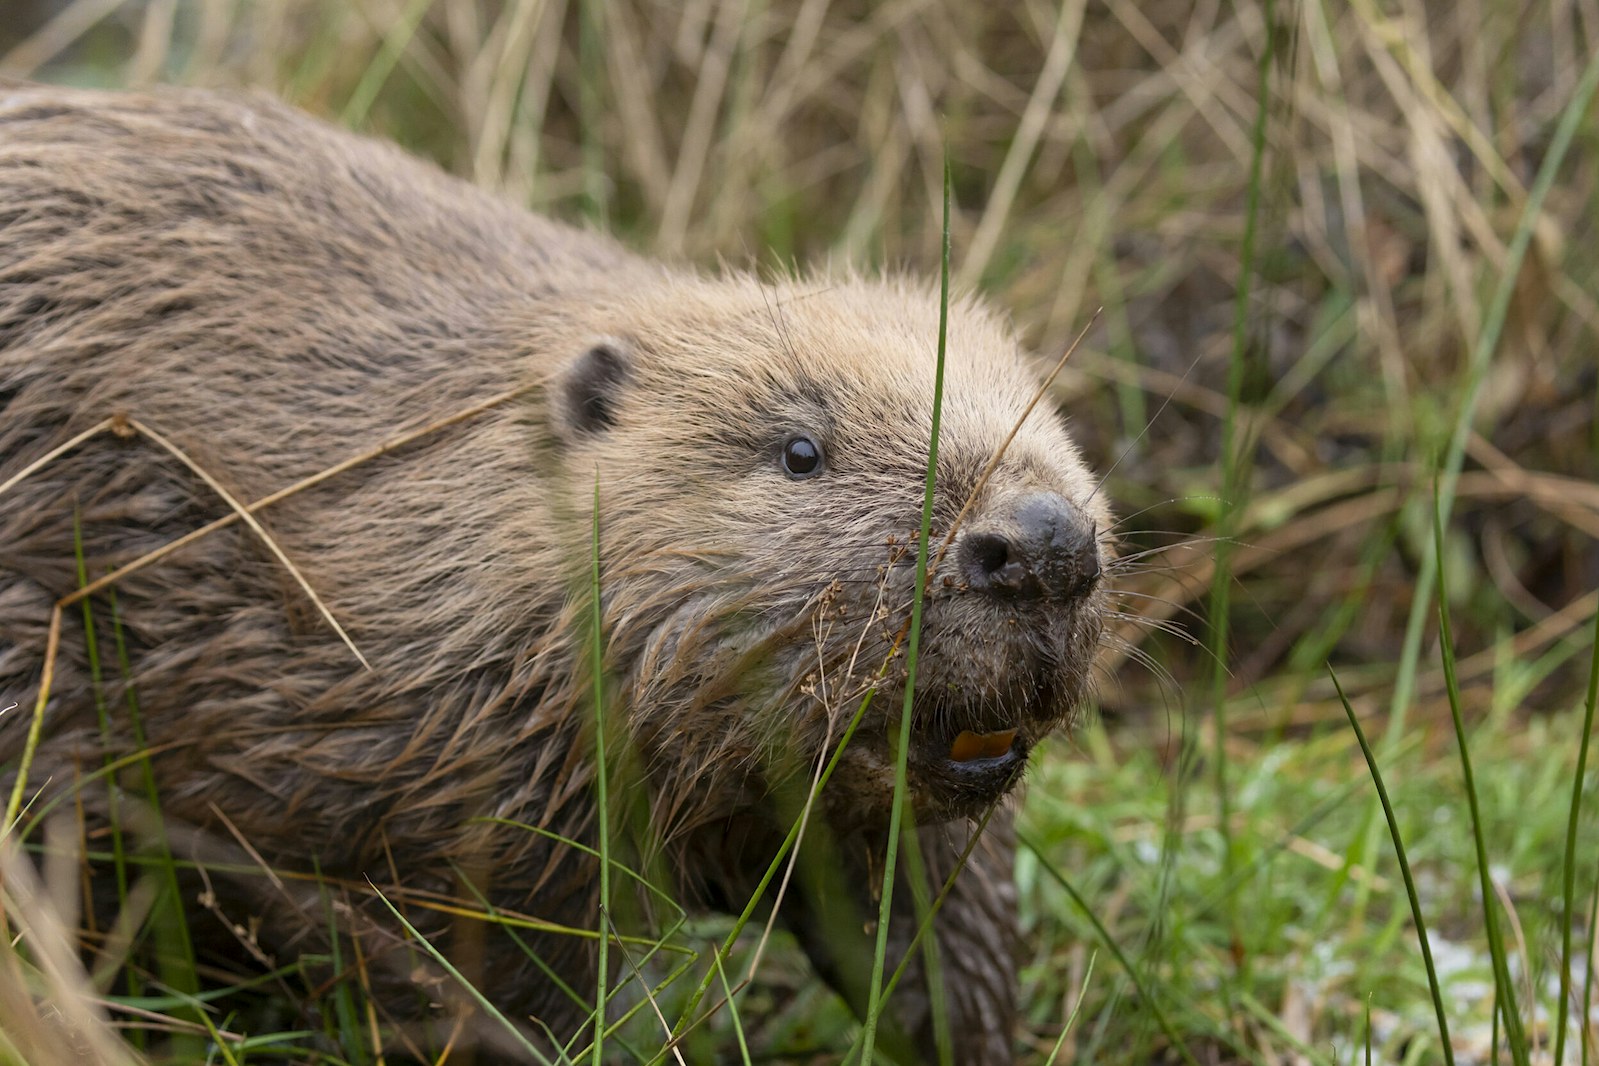 A keystone species: Beavers have huge impact on wetlands - Farm and Dairy